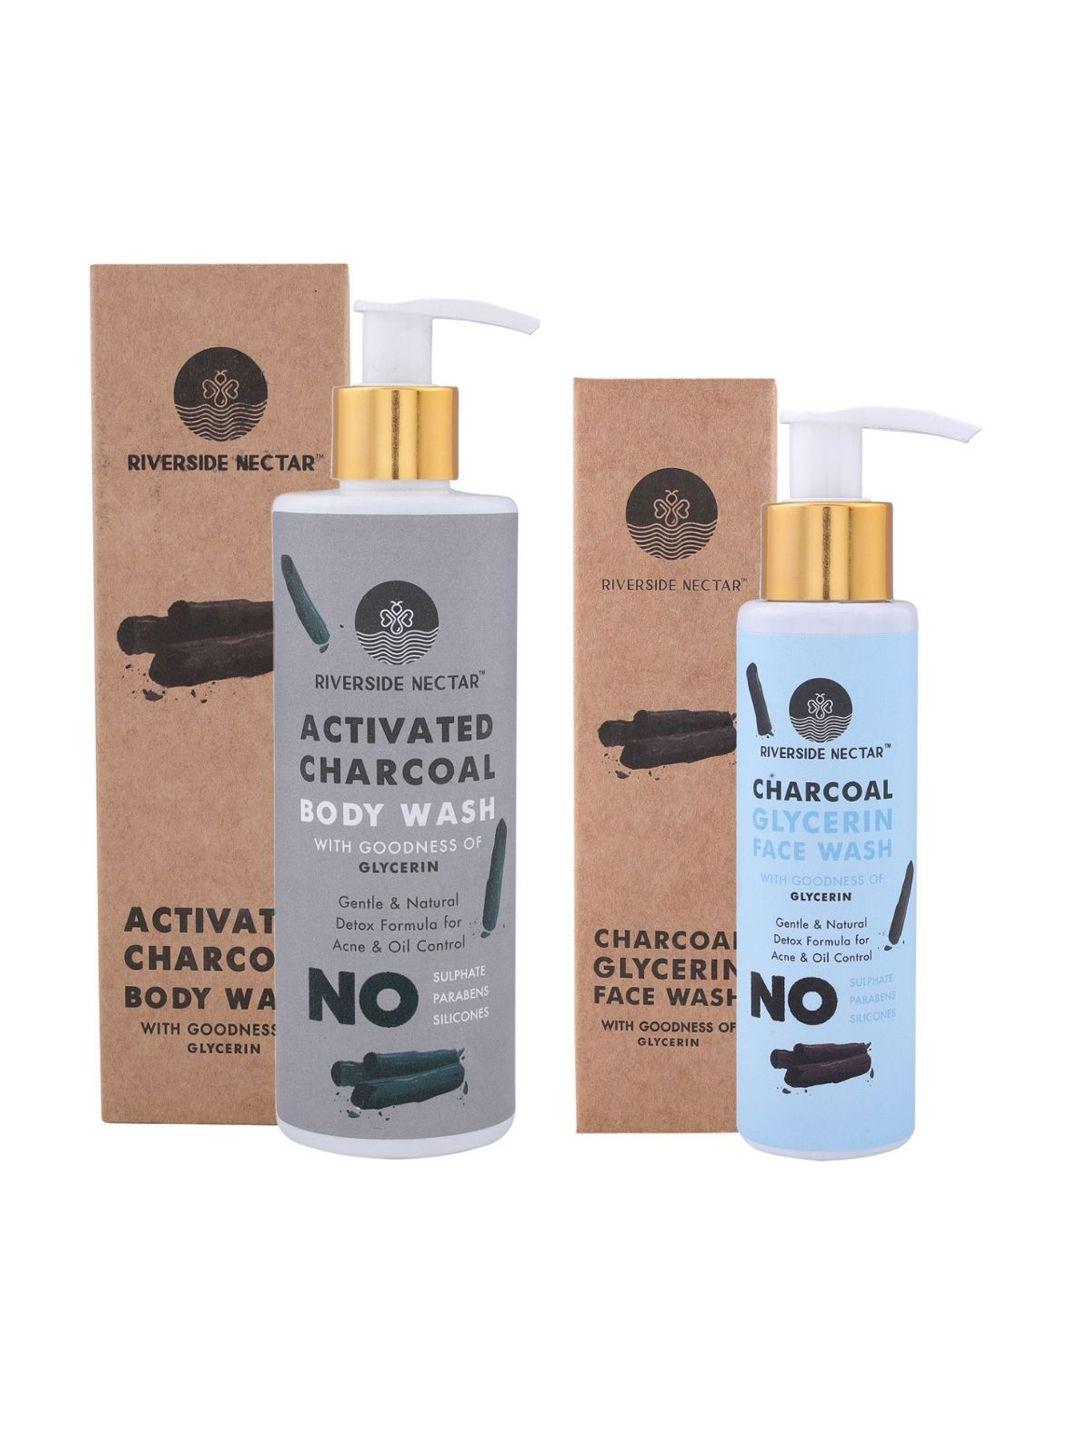 riverside nectar set of activated charcoal body wash & face wash